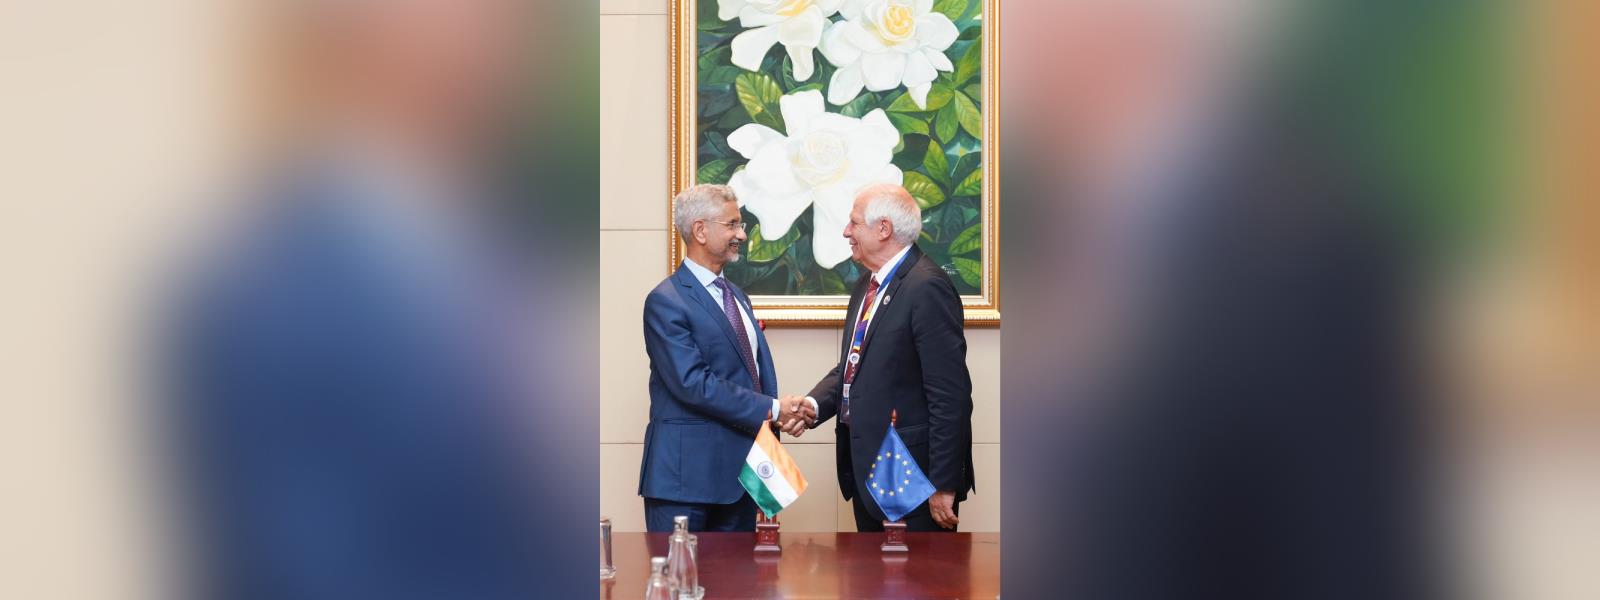 External Affairs Minister Dr. S. Jaishankar met H.E. Mr. Josep Borrell Fontelles, High Representative of the European Union for Foreign Affairs and Security Policy on the sidelines of ASEAN meetings in Vientiane